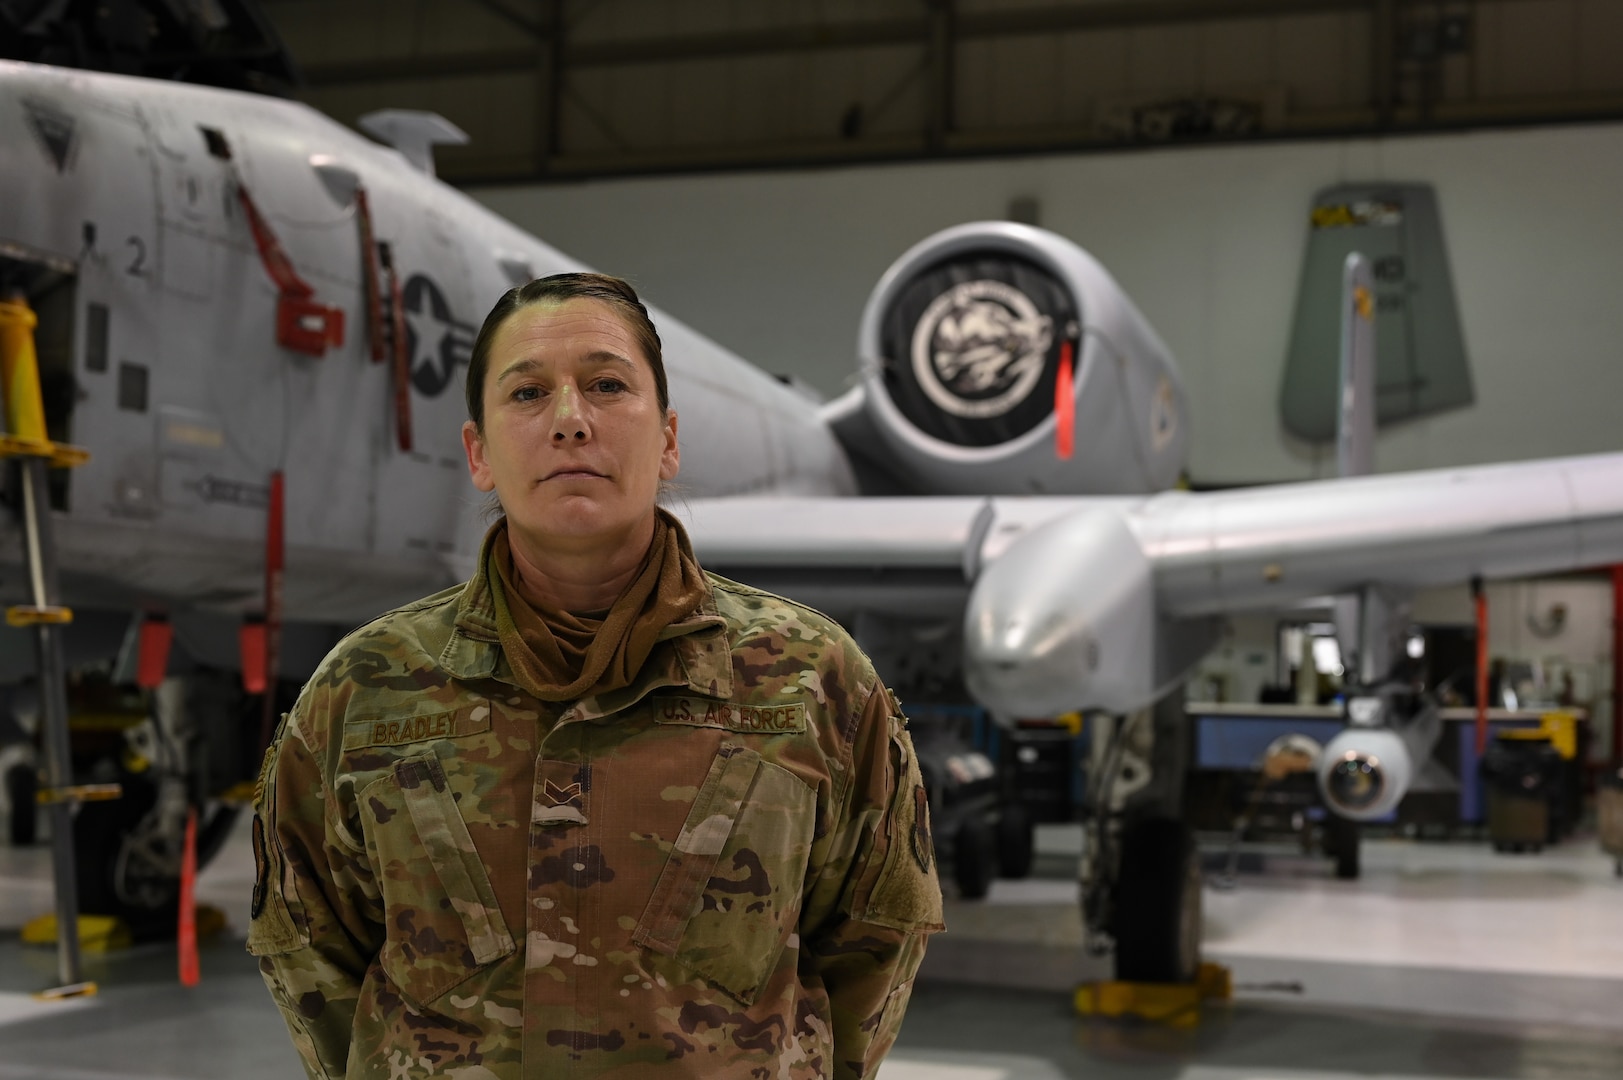 Senior Airman Jayme Bradley, an electrical and environmental specialist for the 175th Maintenance Squadron, Maryland National Guard, poses in front of an A-10C Thunderbolt II aircraft Dec. 18, 2020, at the Warfield Air National Guard Base at Martin State Airport, Middle River, Md. Bradley is the only full-time female Airman in her shop in the male-dominated career field of aircraft maintenance.